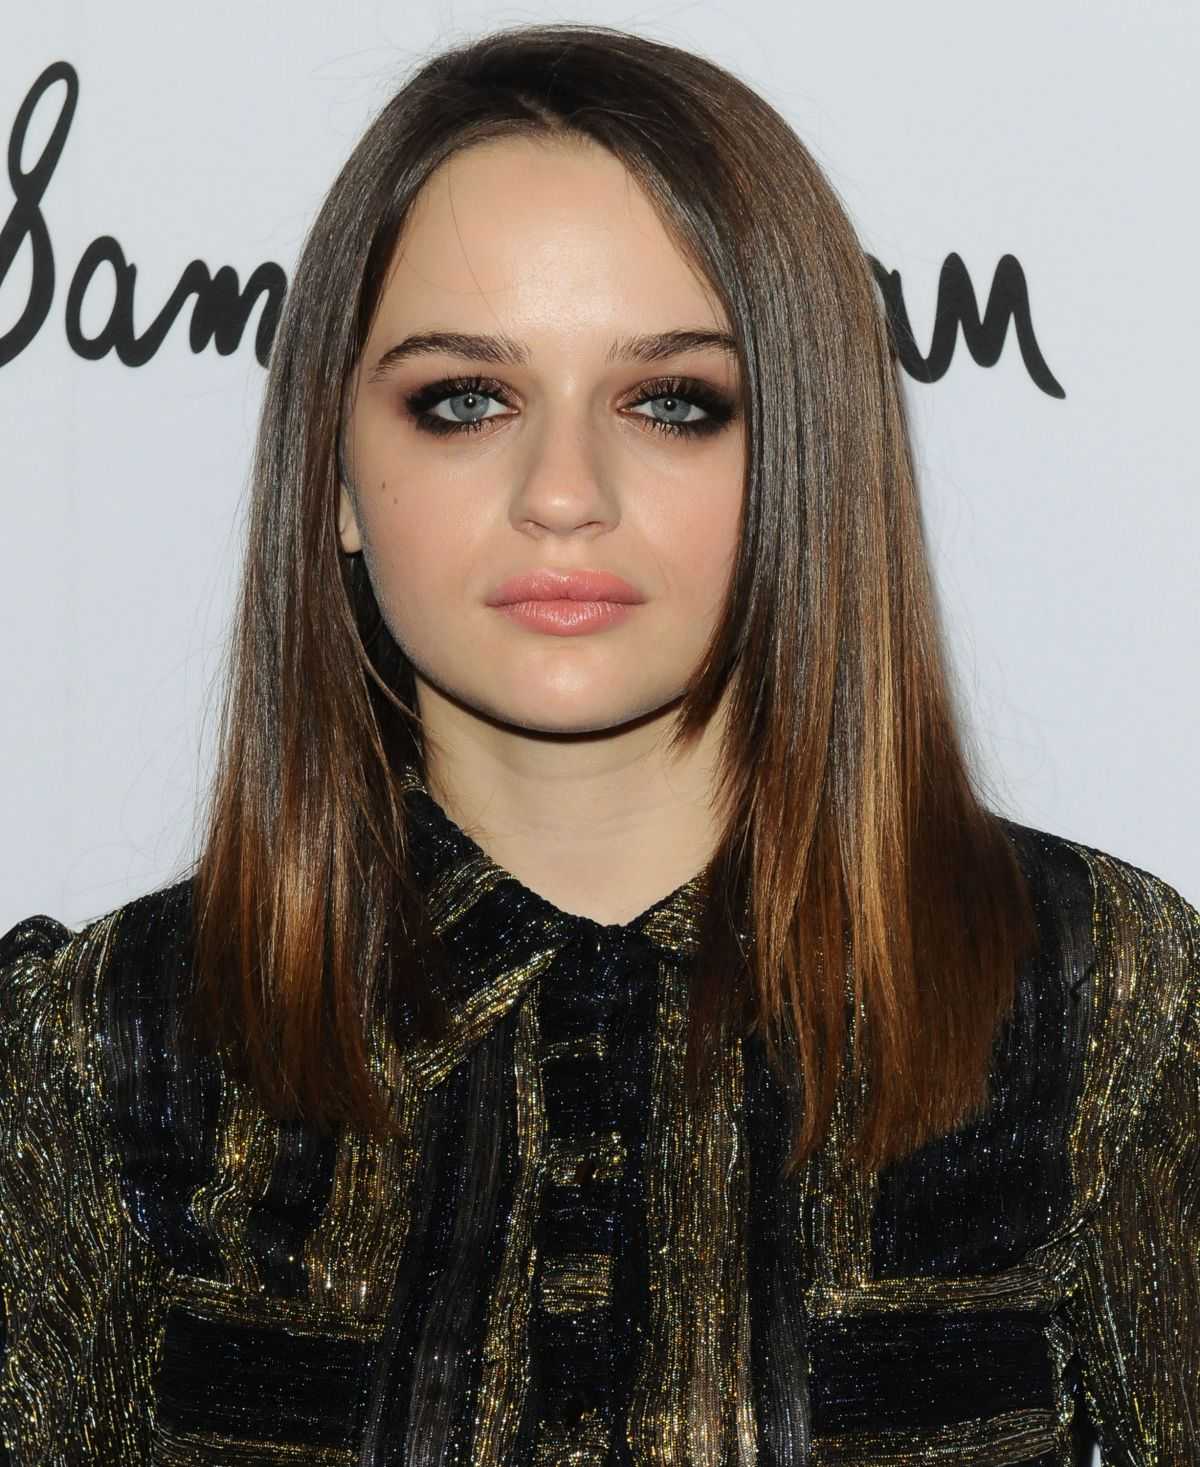 70+ Hot And Sexy Pictures Of Joey King Exposes Her Curvy Body 7